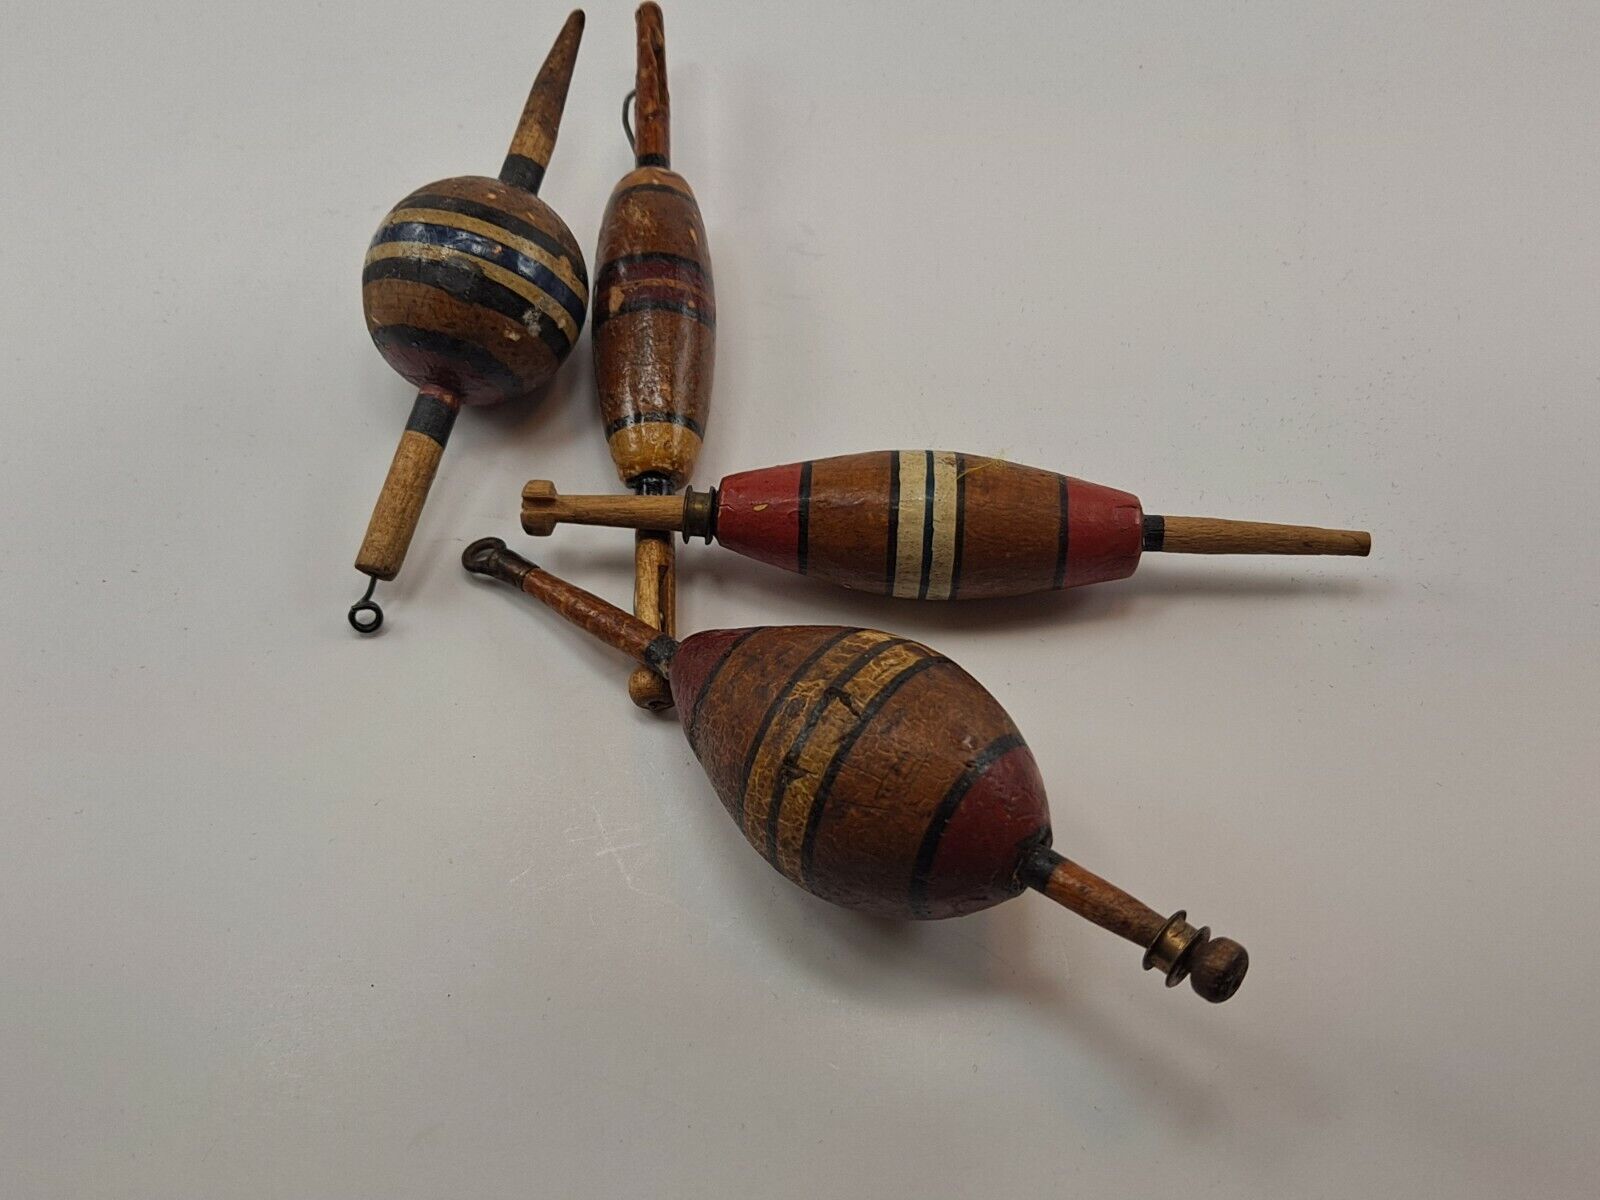 A nice bunch of 4 antique cork fishing floats - vintage bobbers